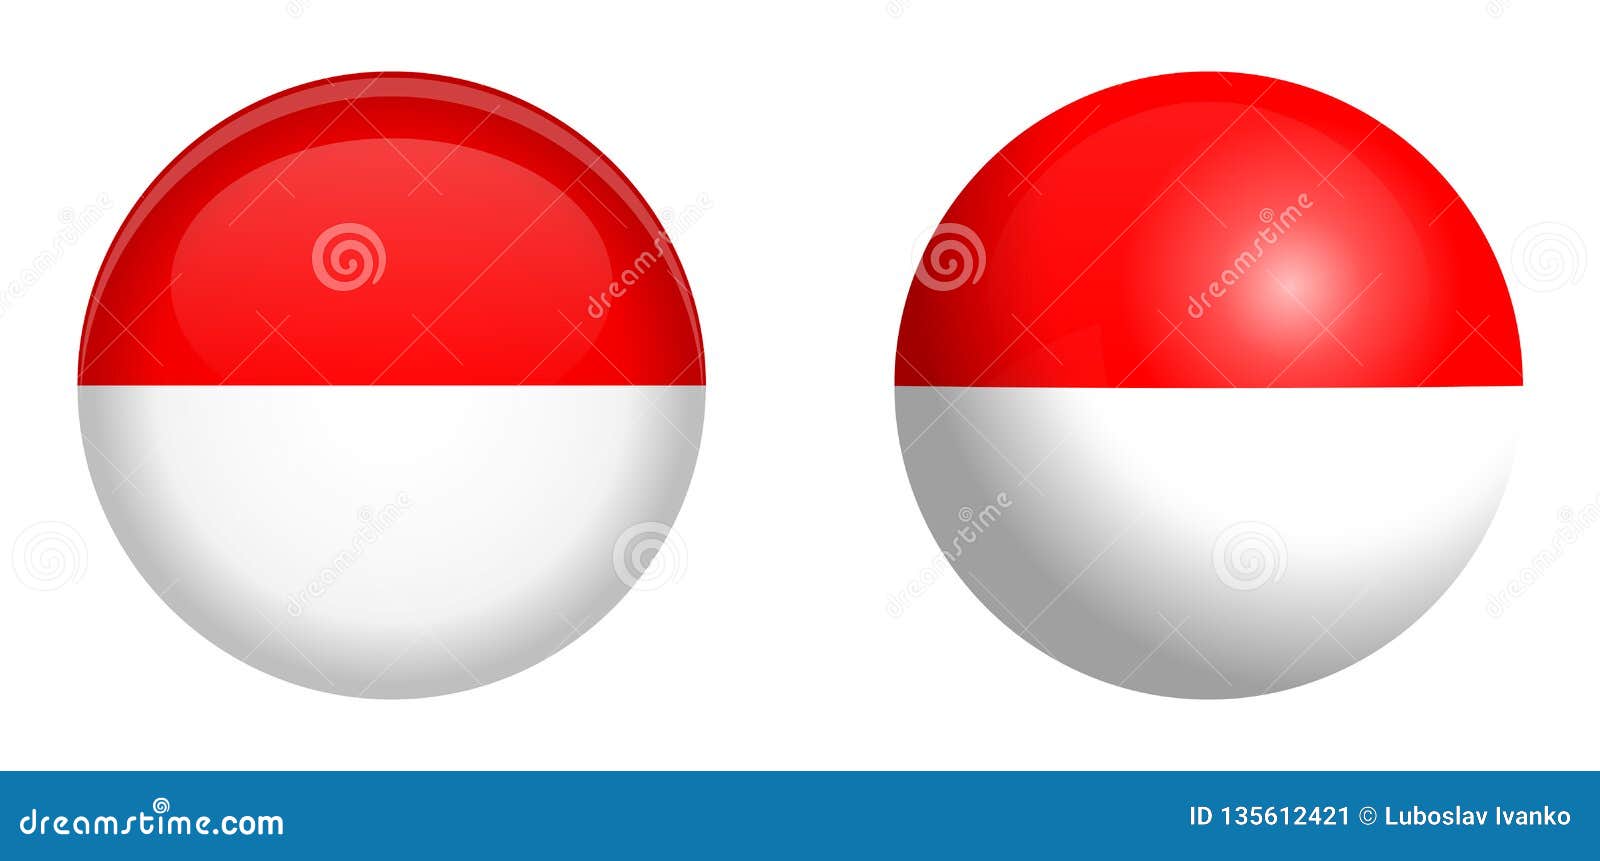 Download Indonesia Flag Under 3d Dome Button And On Glossy Sphere ...